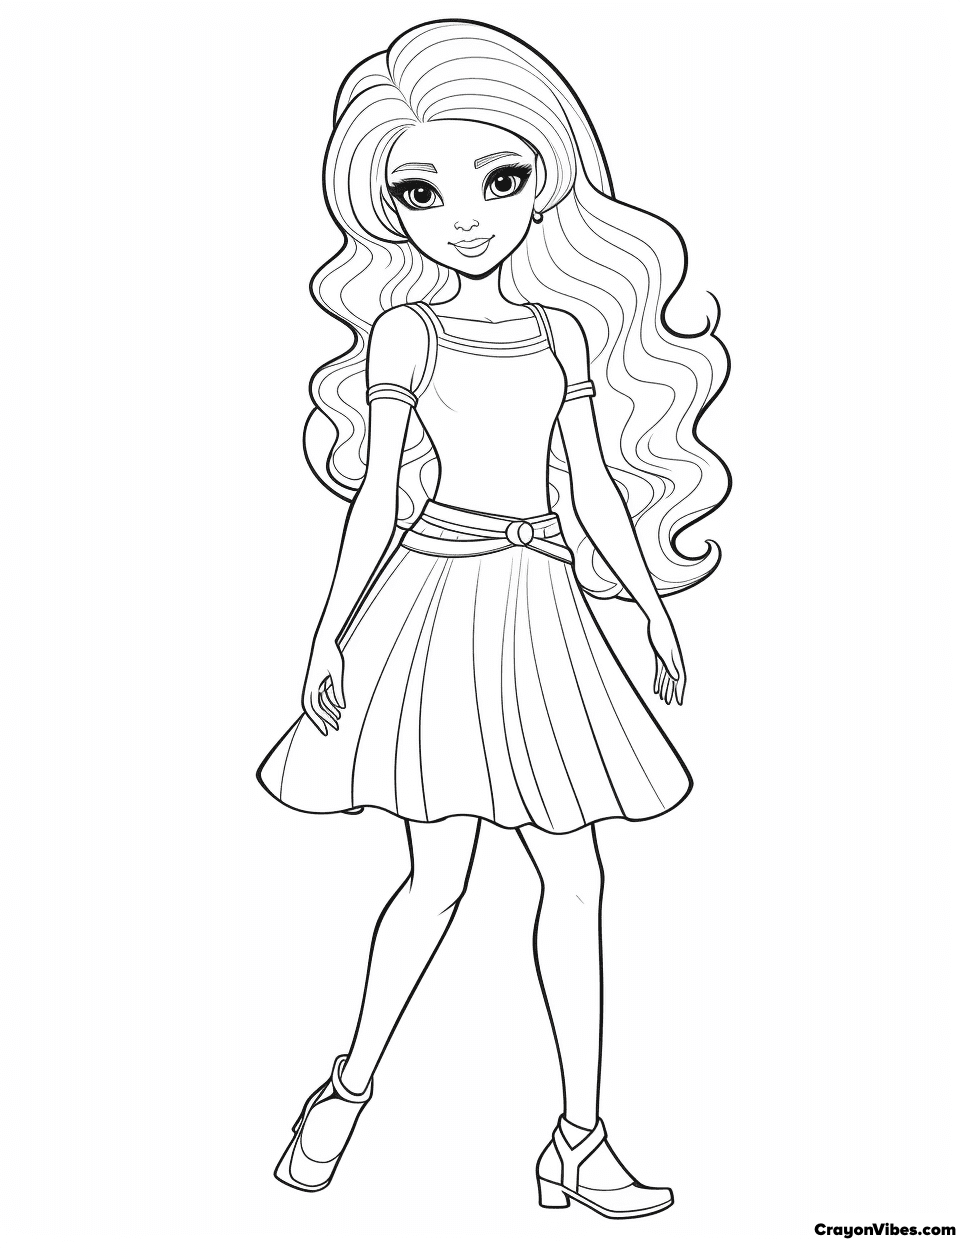 Barbie Coloring Pages Free Printable for Kids